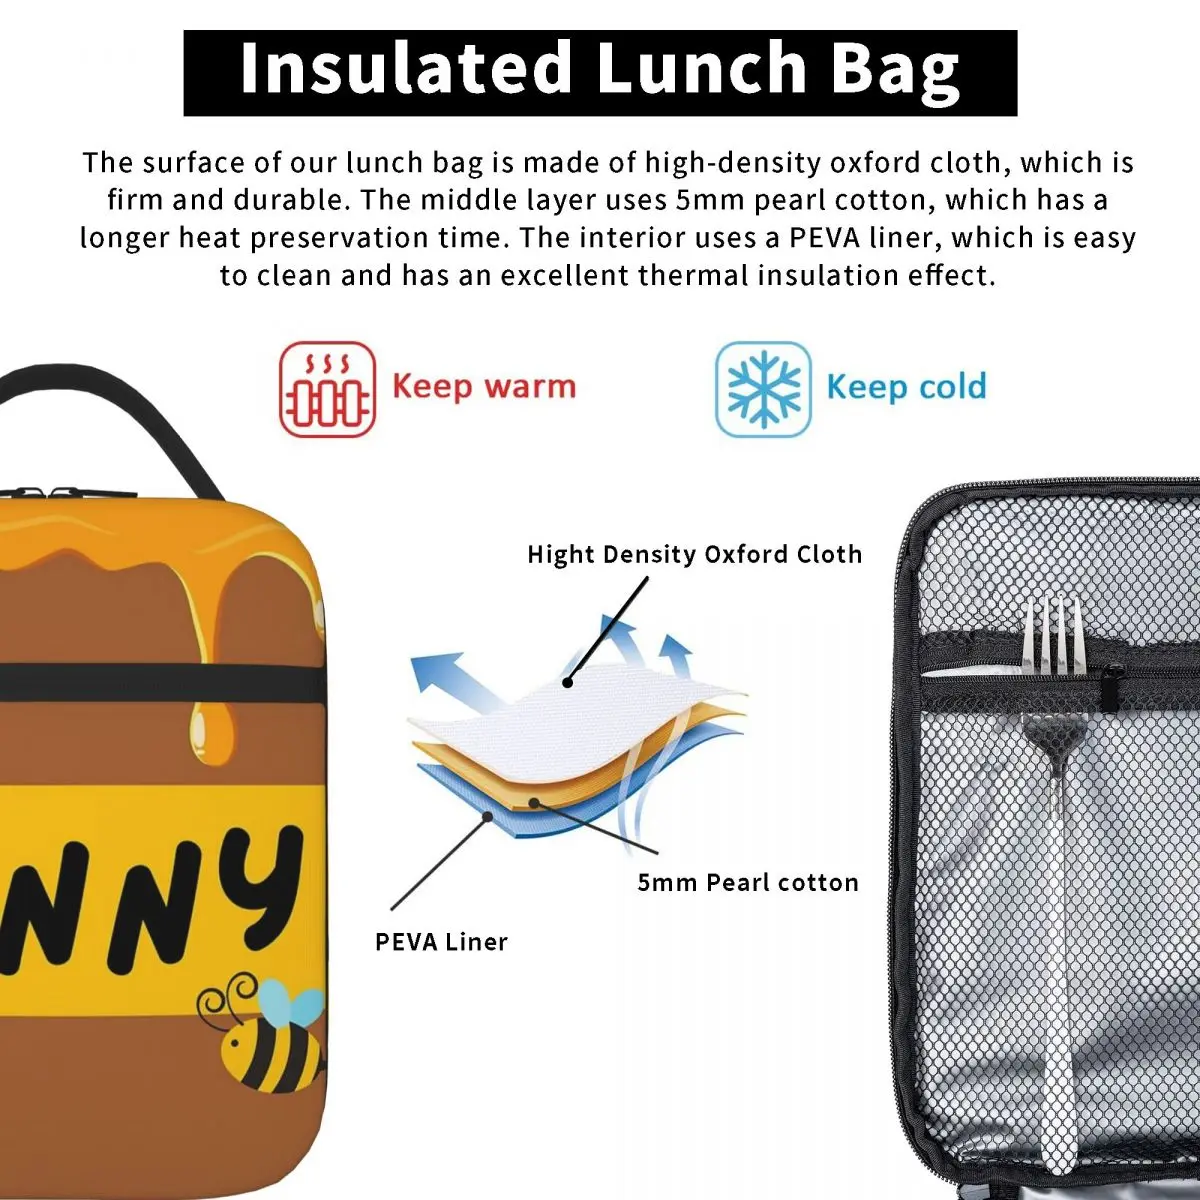 https://ae01.alicdn.com/kf/Sd84f33e0f00d43efb365a167e85ca155J/Winnie-The-Pooh-Hunny-Pot-Insulated-Lunch-Bags-Waterproof-Picnic-Bags-Thermal-Lunch-Box-Lunch-Tote.jpg